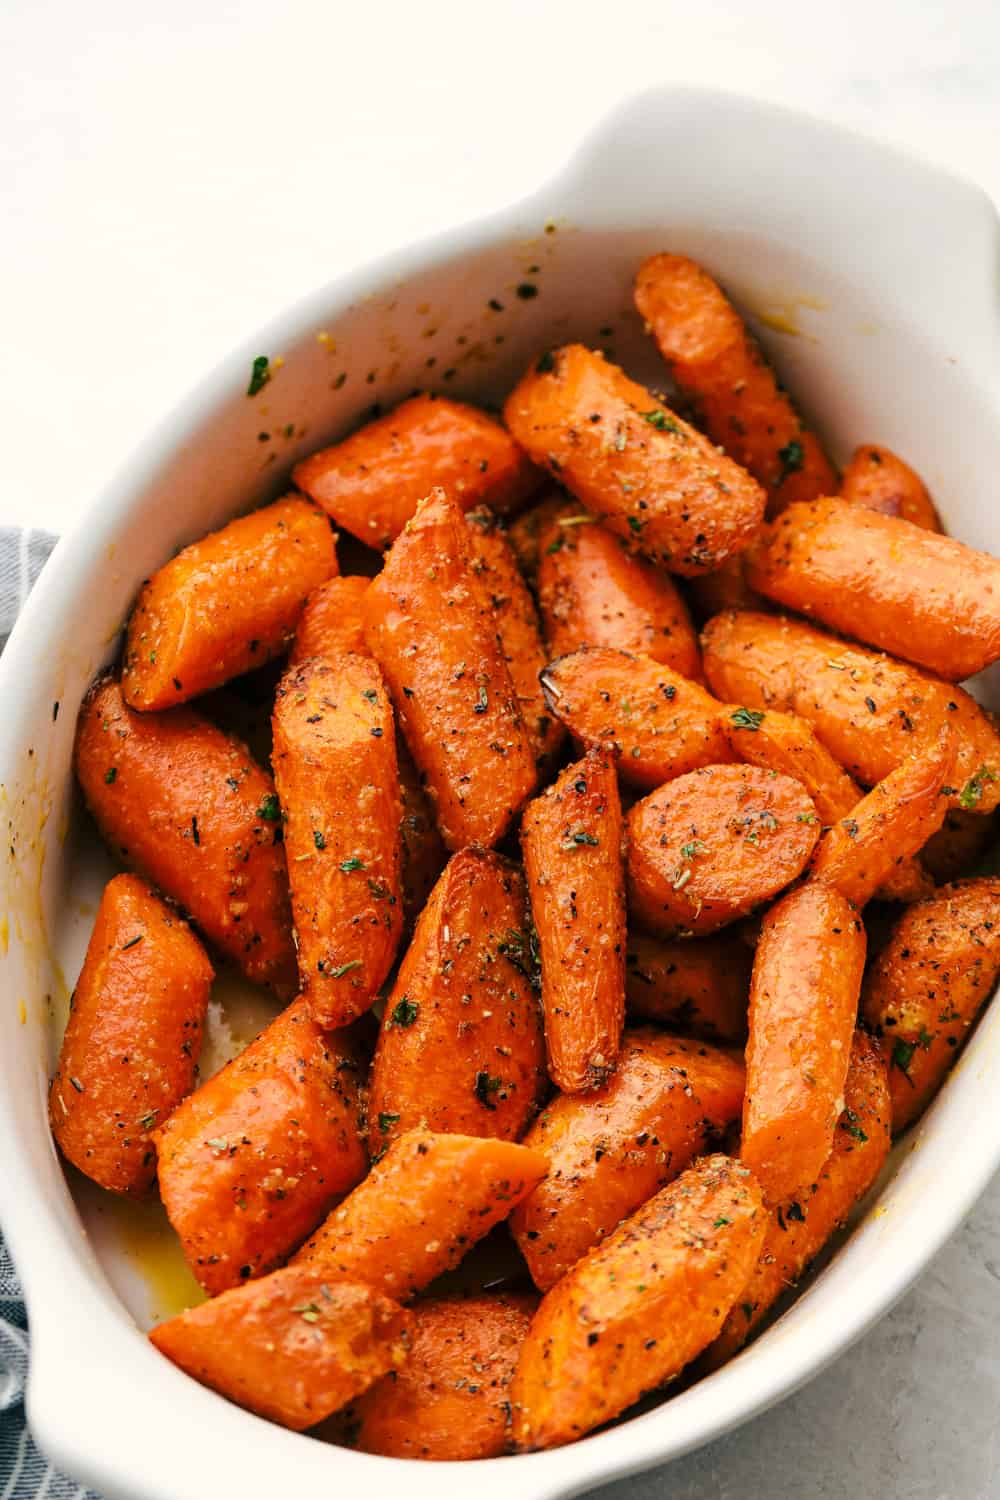 Cooked carrots in a white dish.